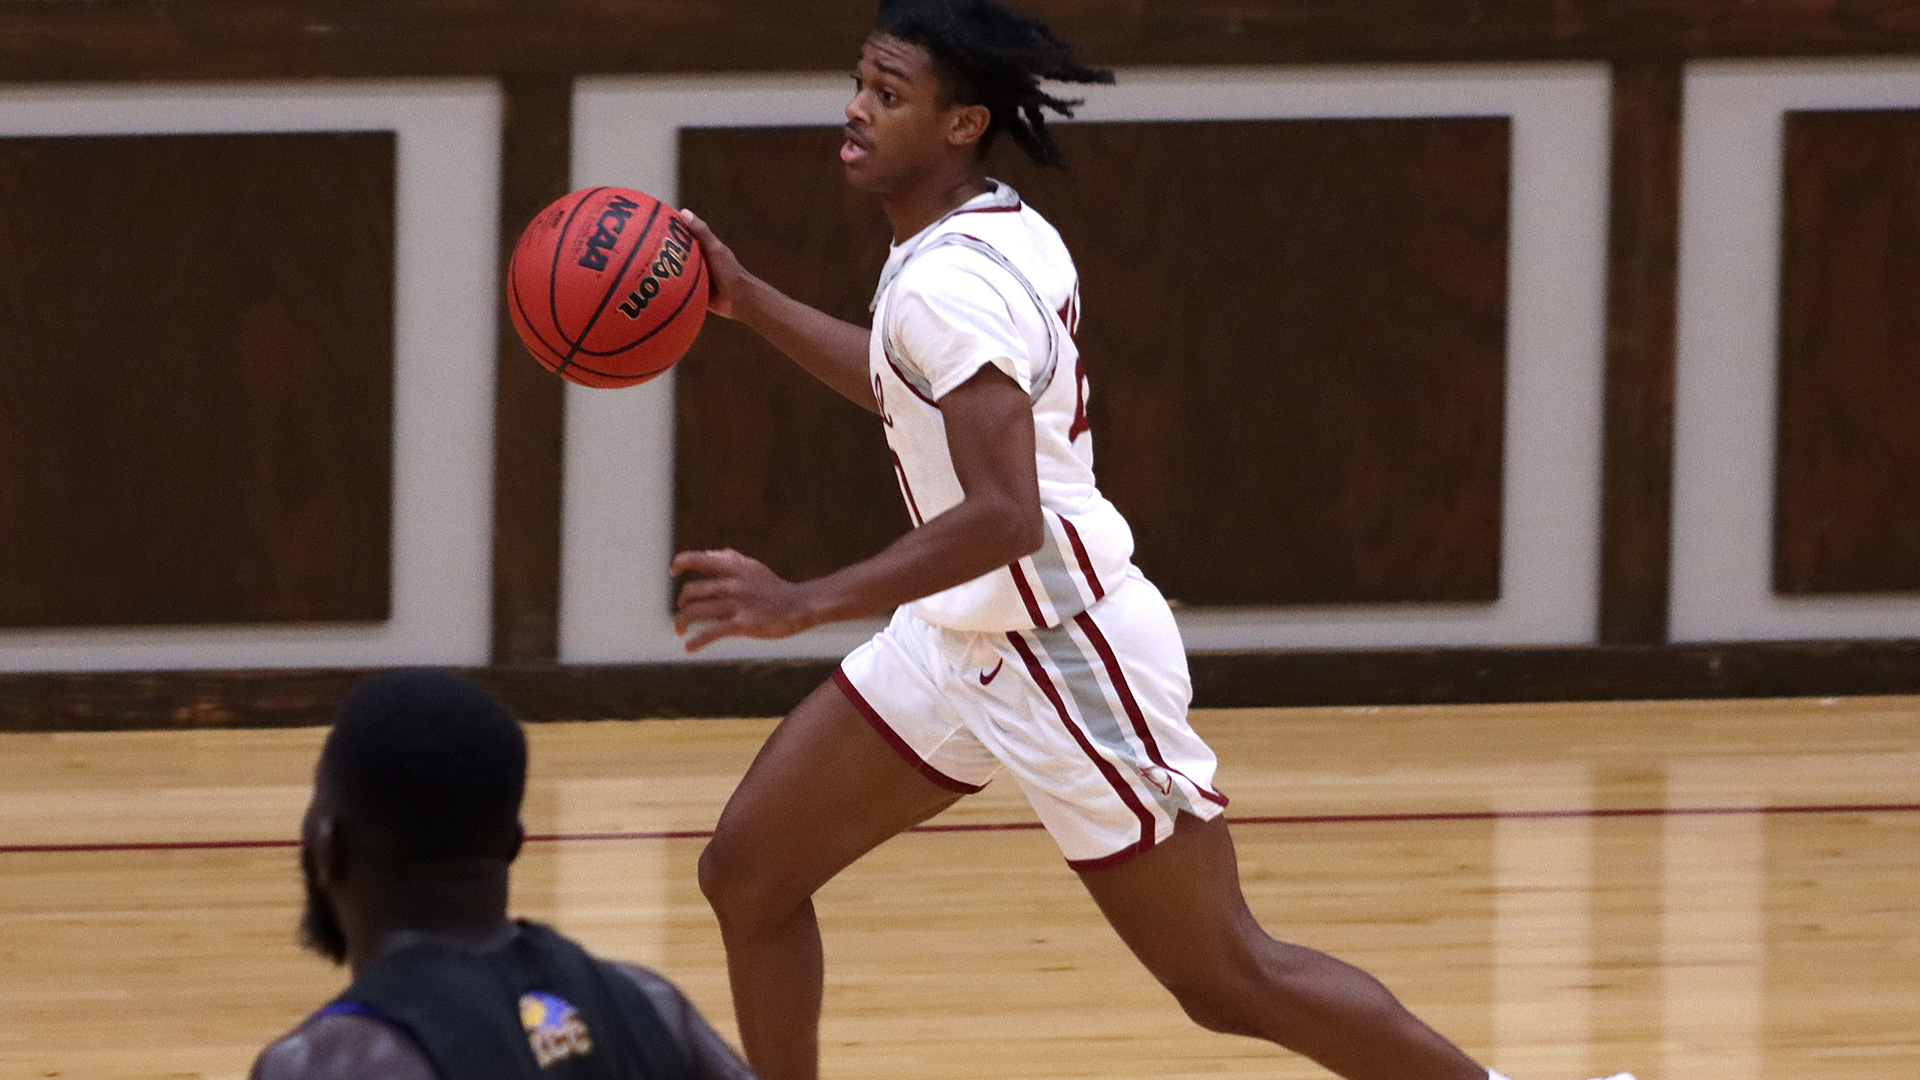 CCCB junior Adris Hamilton scored four points on Thursday during the Saints' 110-91 victory over Ozark Christian College.